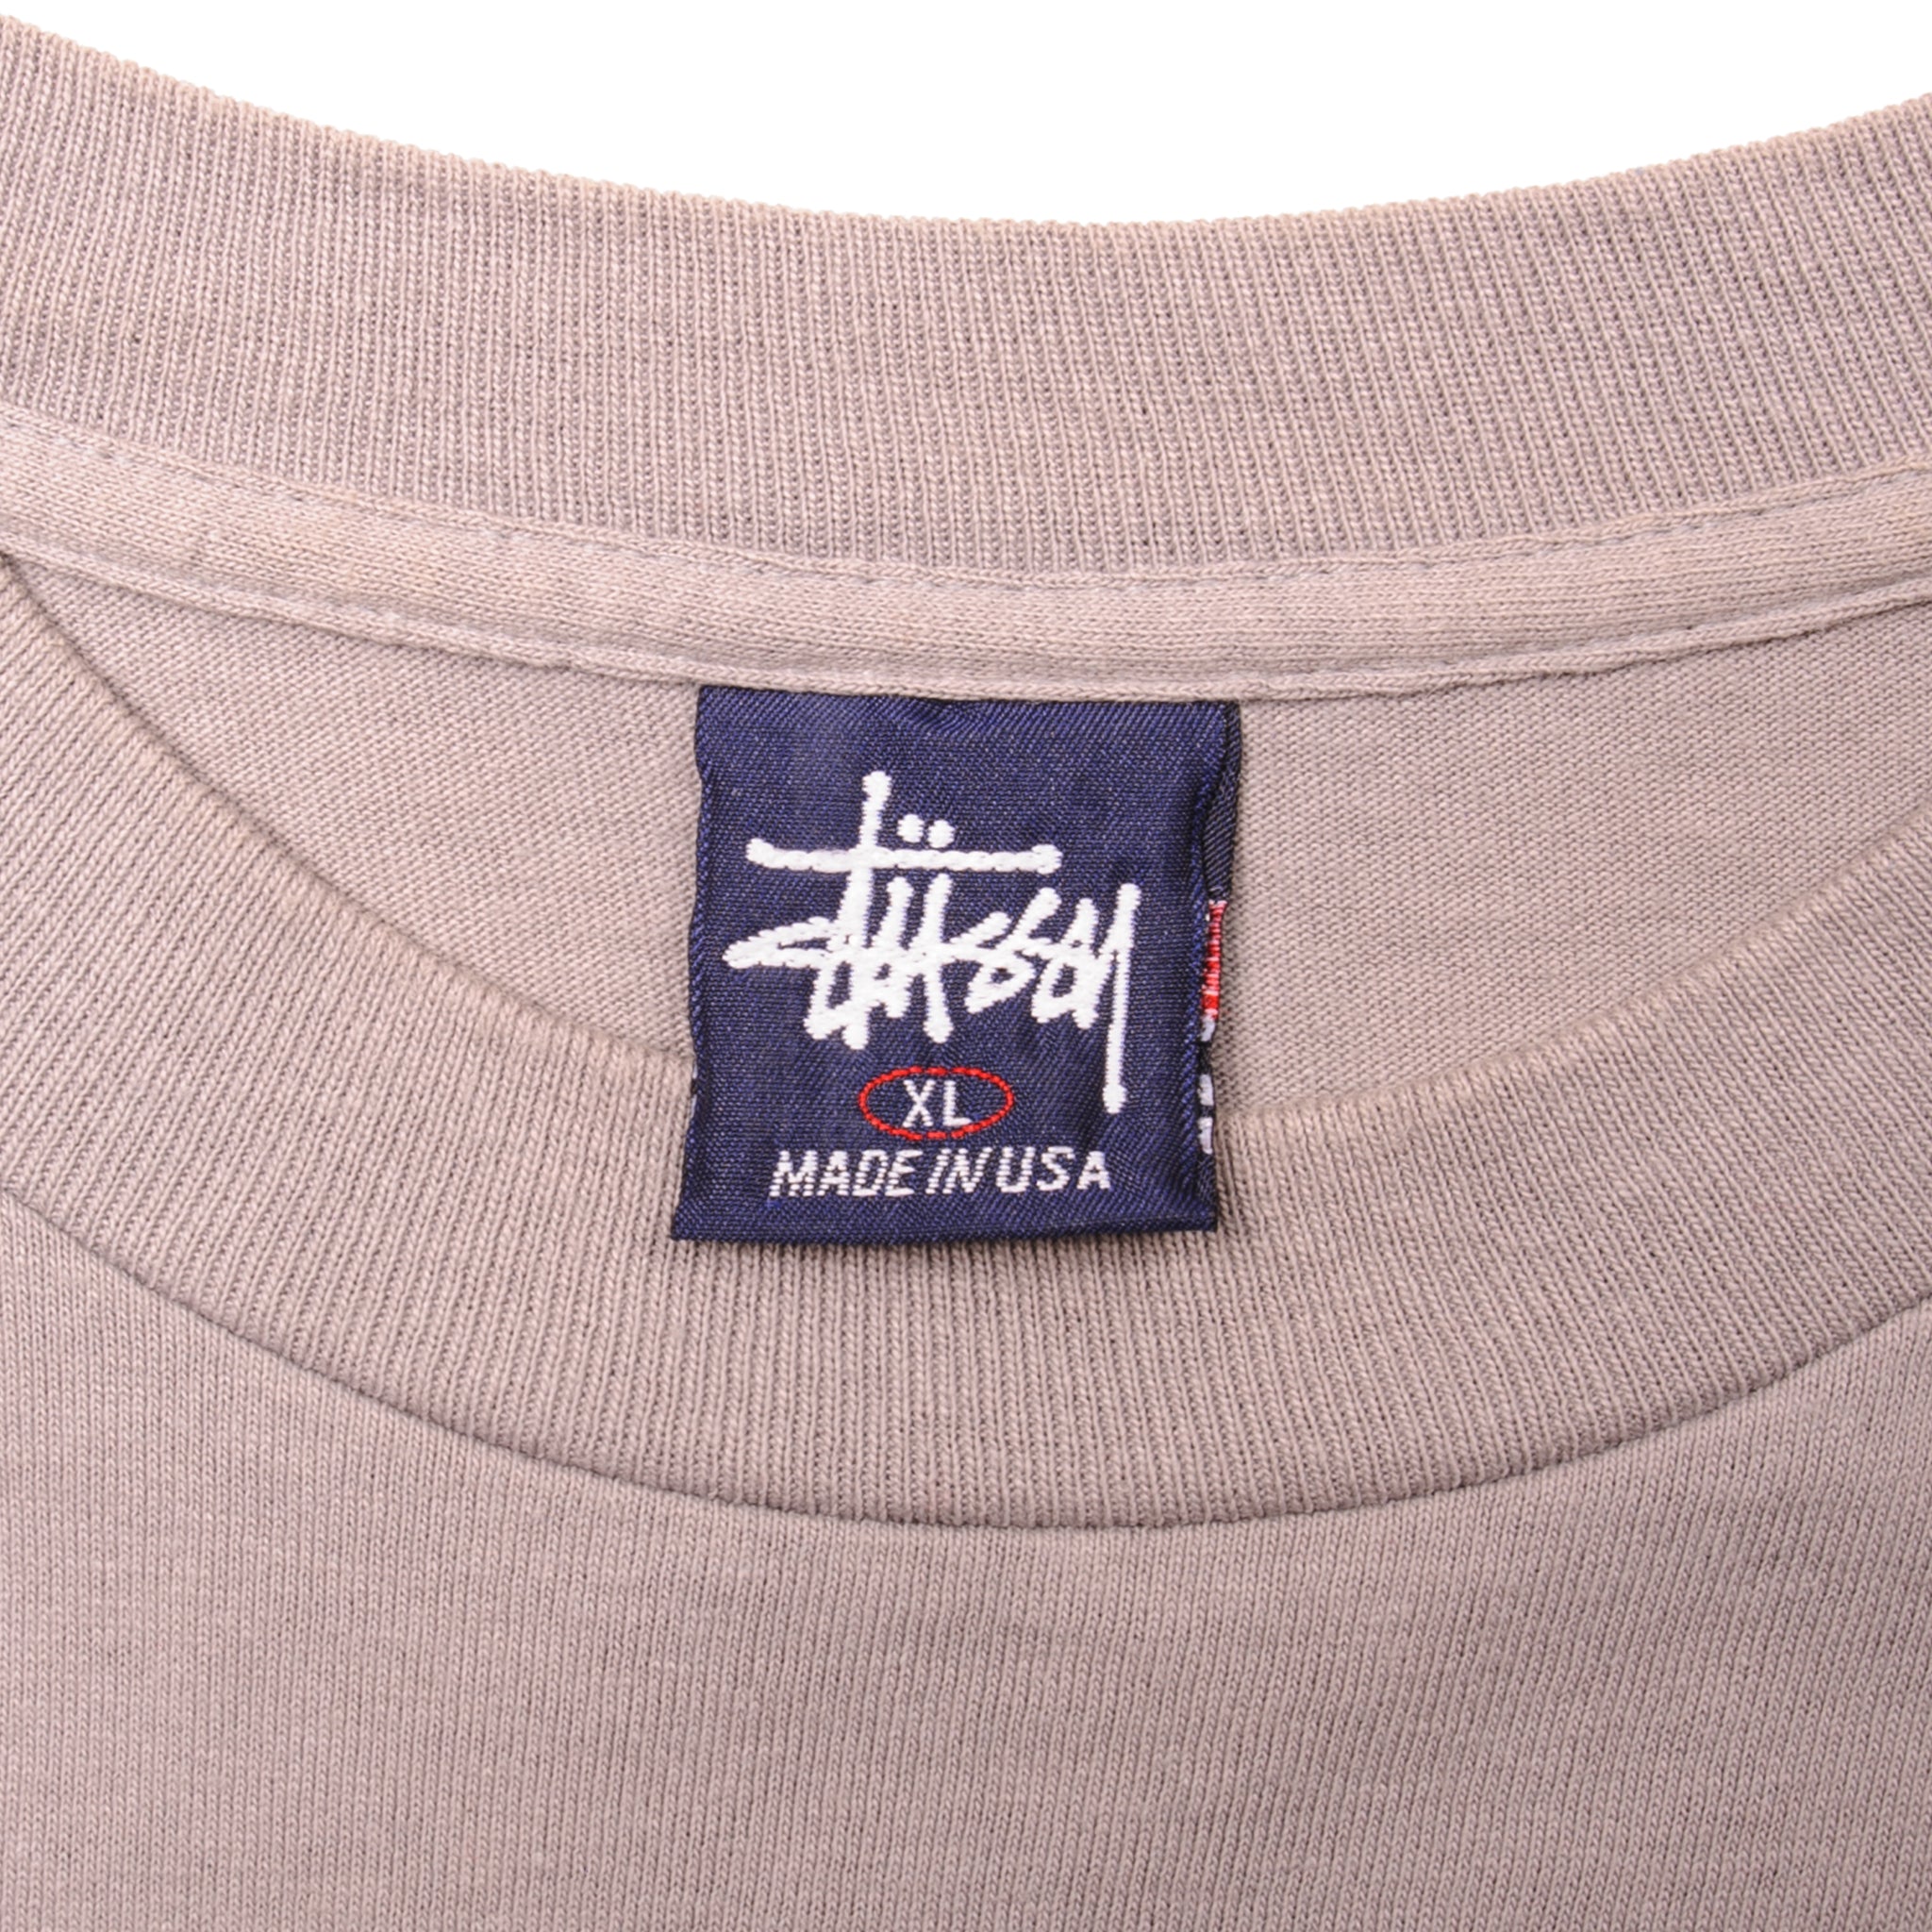 Stussy MADE IN USA